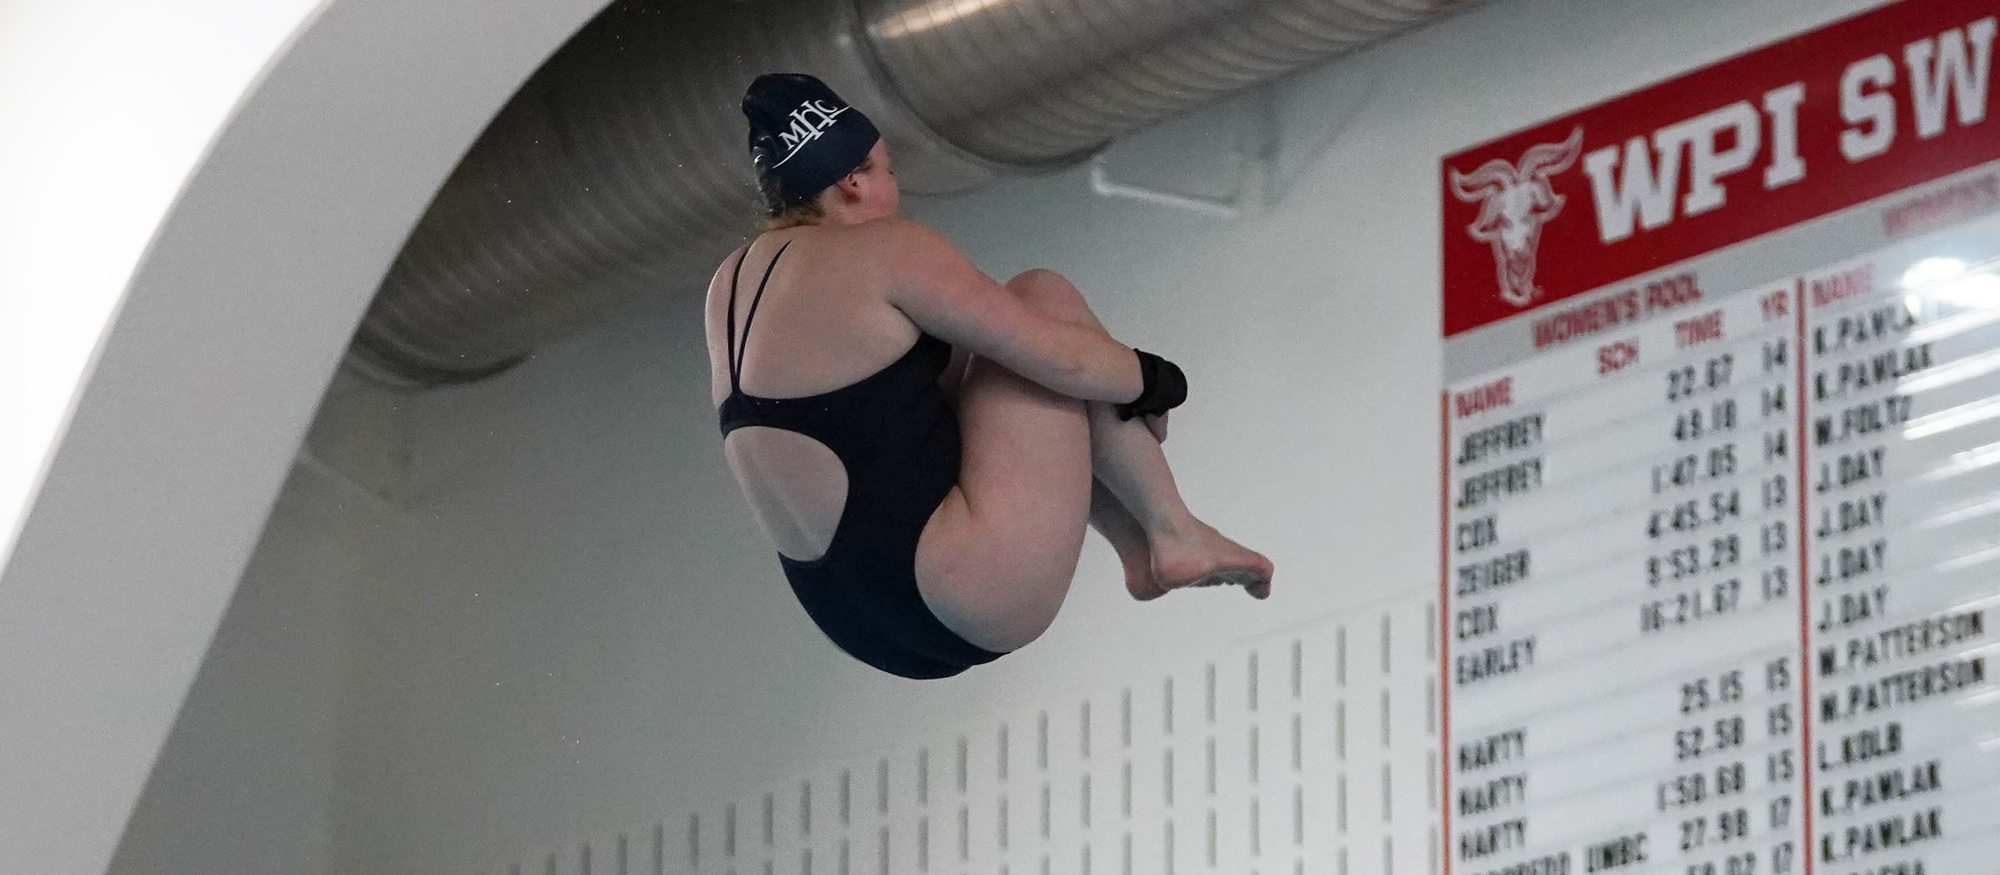 Mount Holyoke senior Maddy Sewell posted qualifying scores for NCAA Regionals in both 1-meter and 3-meter diving in her season debut on Nov. 11, 2023. (File photo by Alex Gutierrez/WPI Athletics)